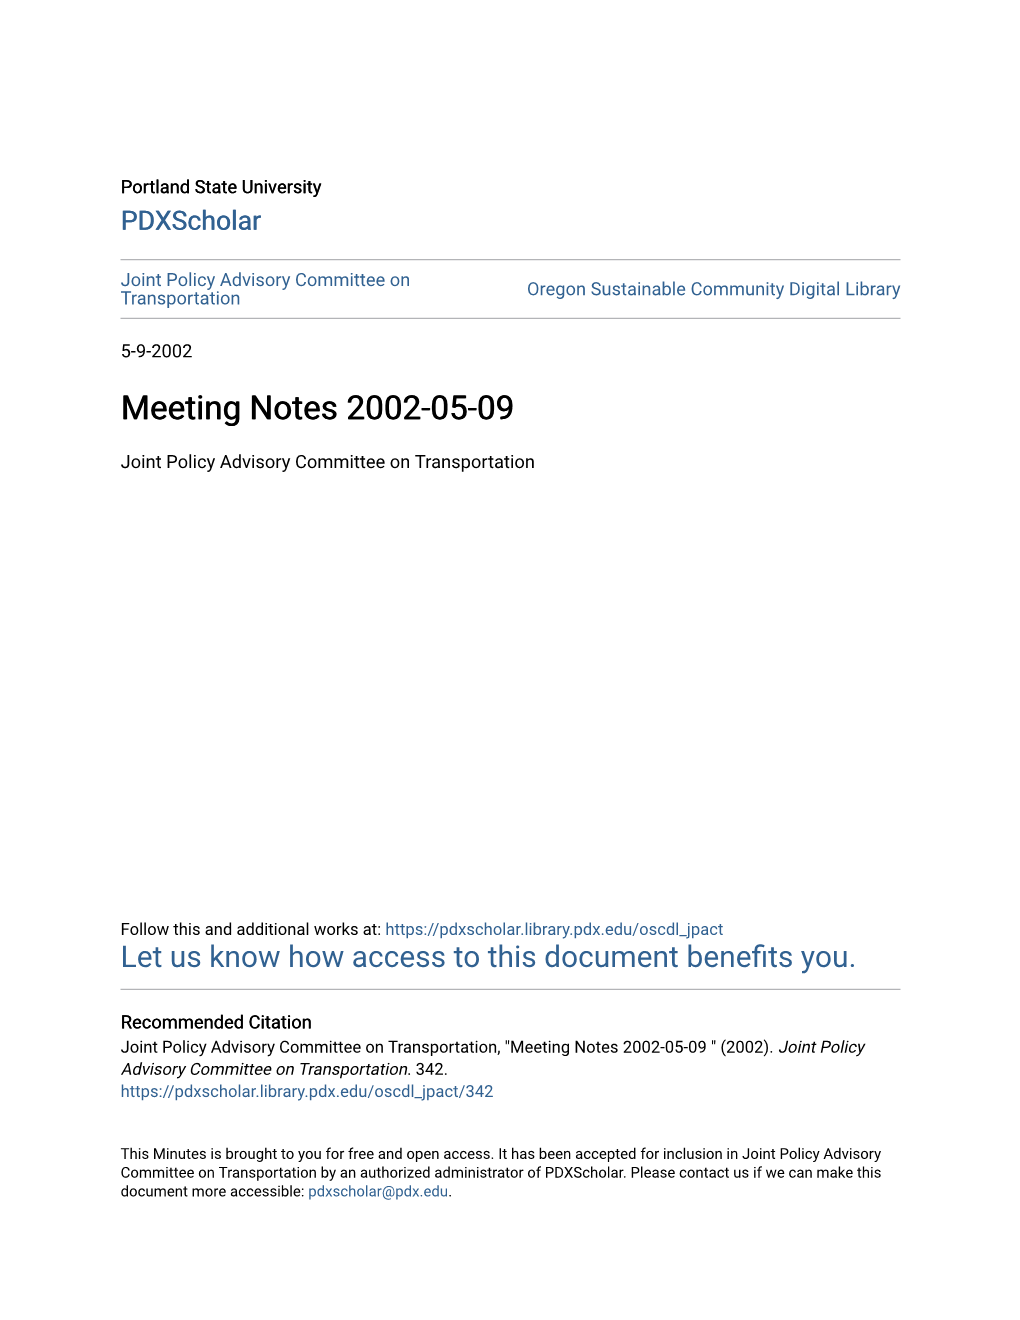 Meeting Notes 2002-05-09